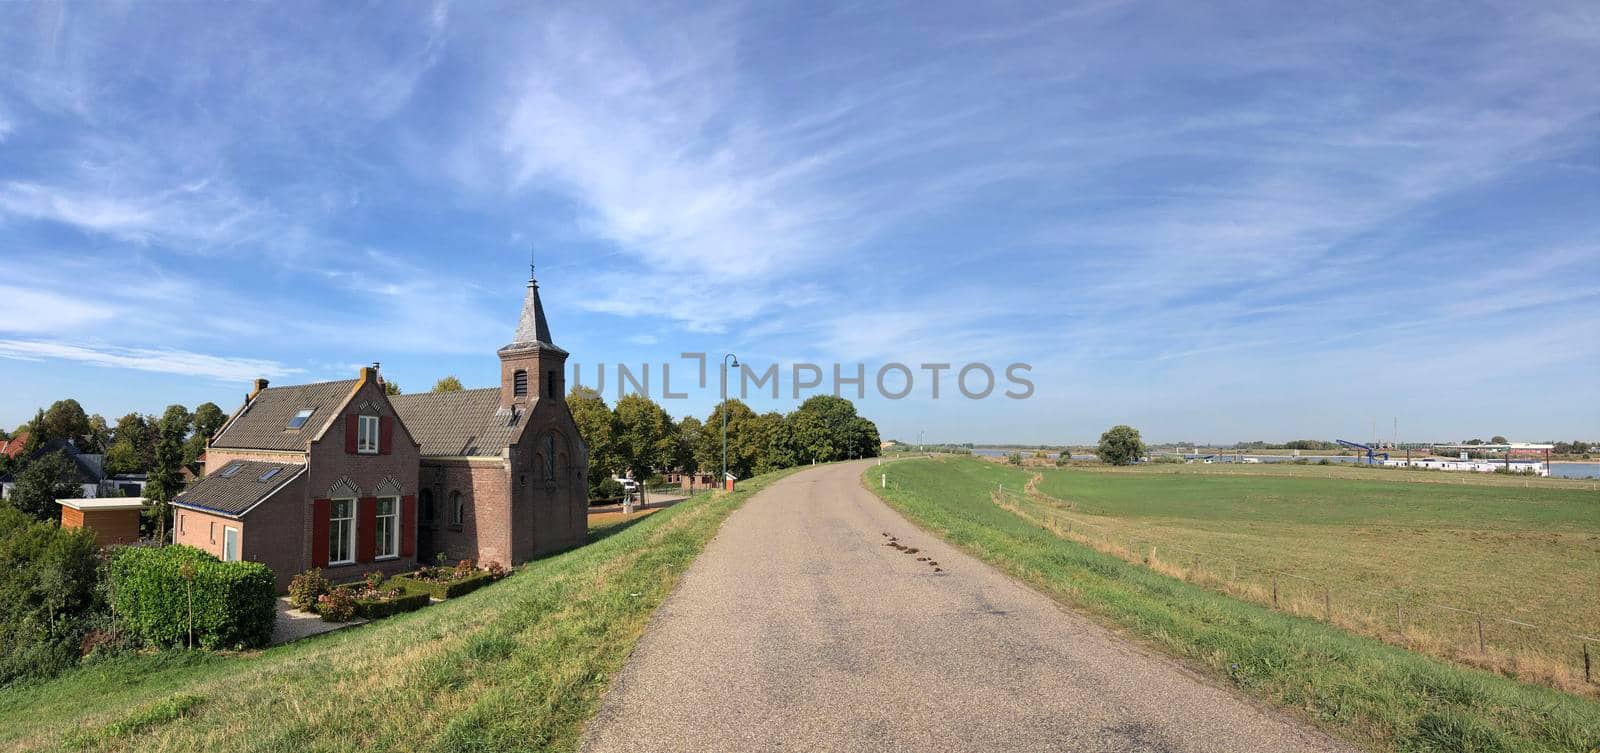 Small church behind the dyke  by traveltelly